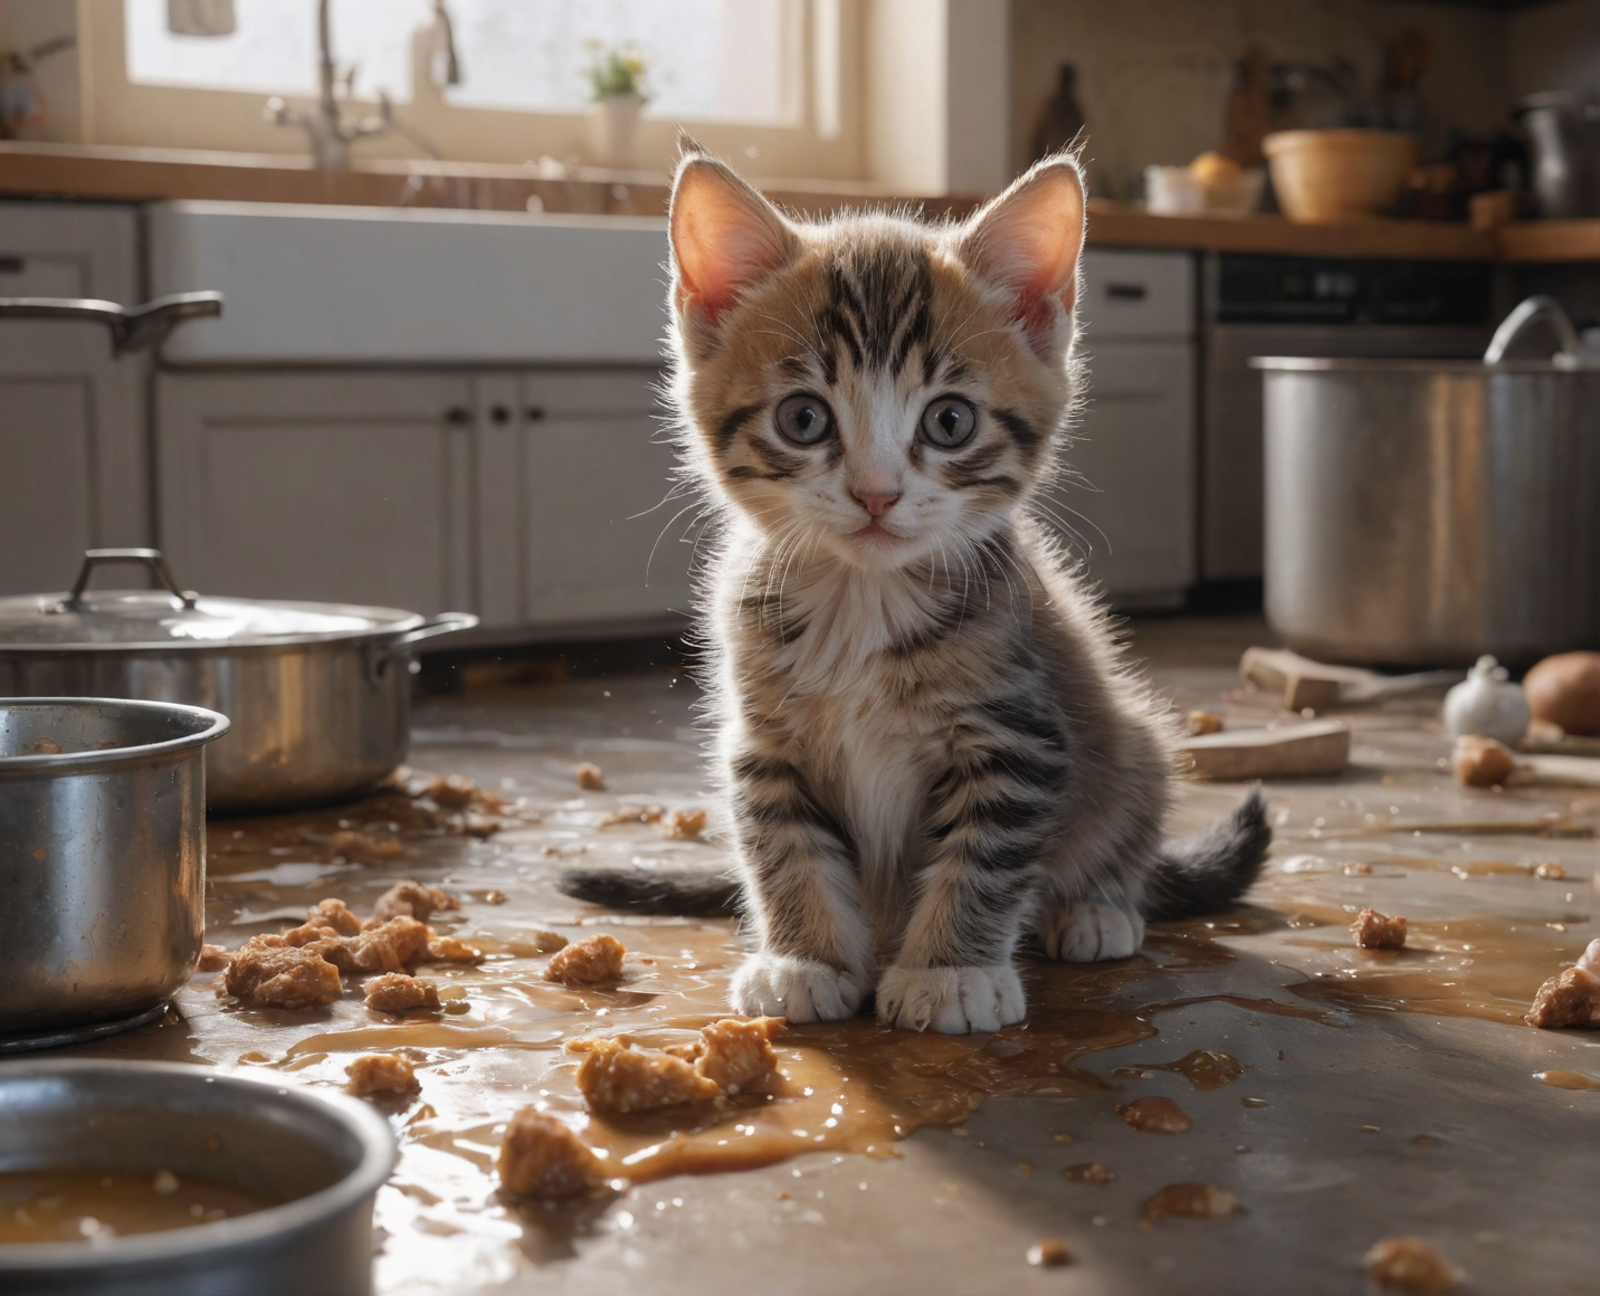 A curious kitten in a messy kitchen.